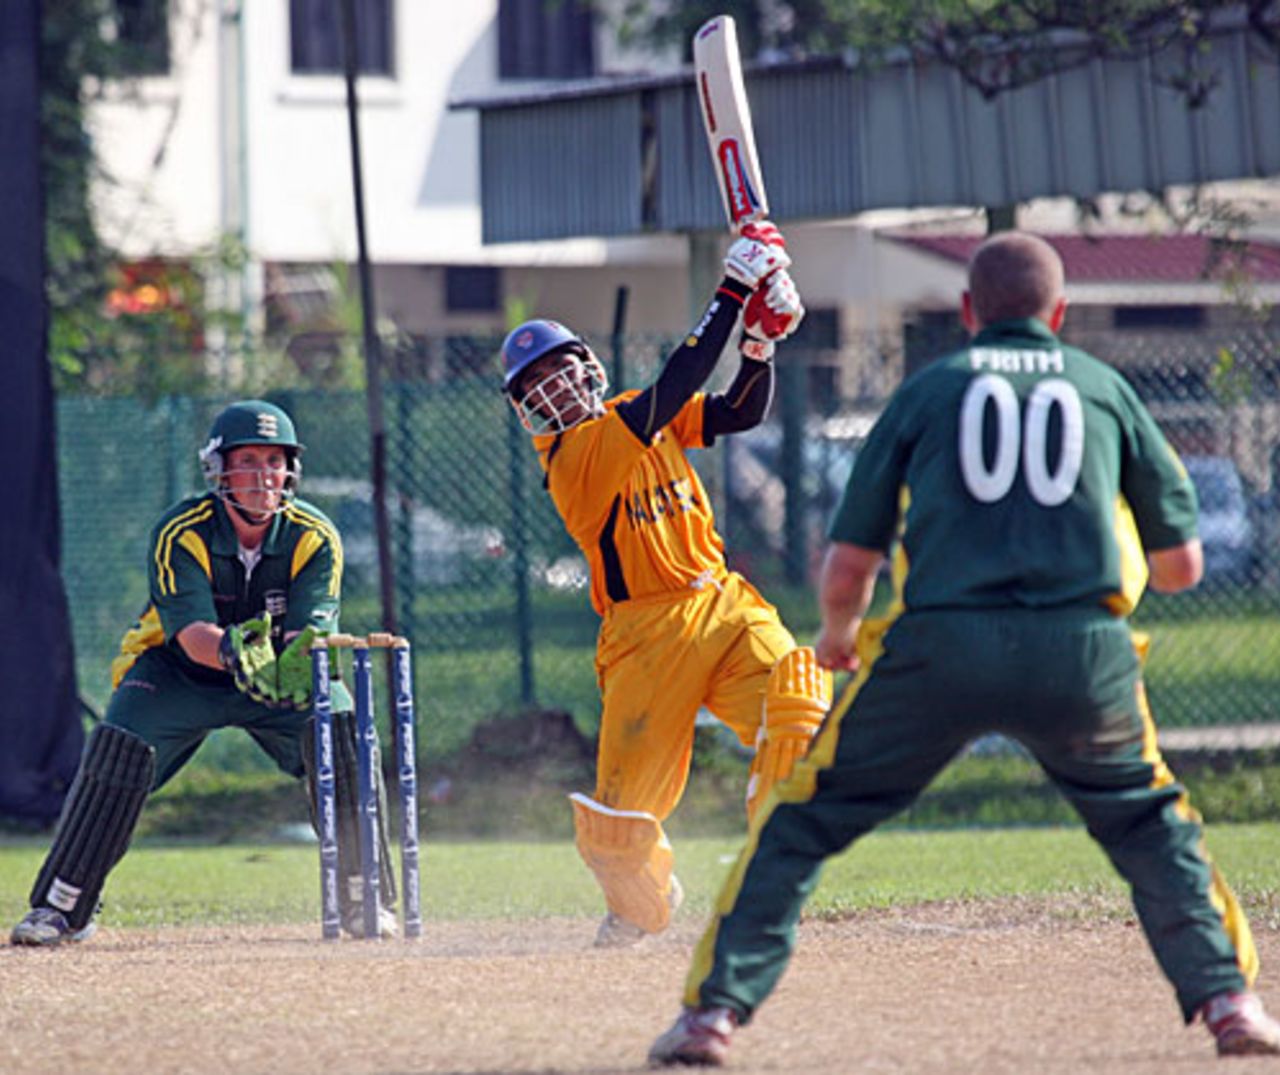 Suhan Alagaratnam hits a six on his way to an unbeaten 80, Guernsey v Malaysia, ICC World Cricket League Division 6, Singapore, September 2, 2009